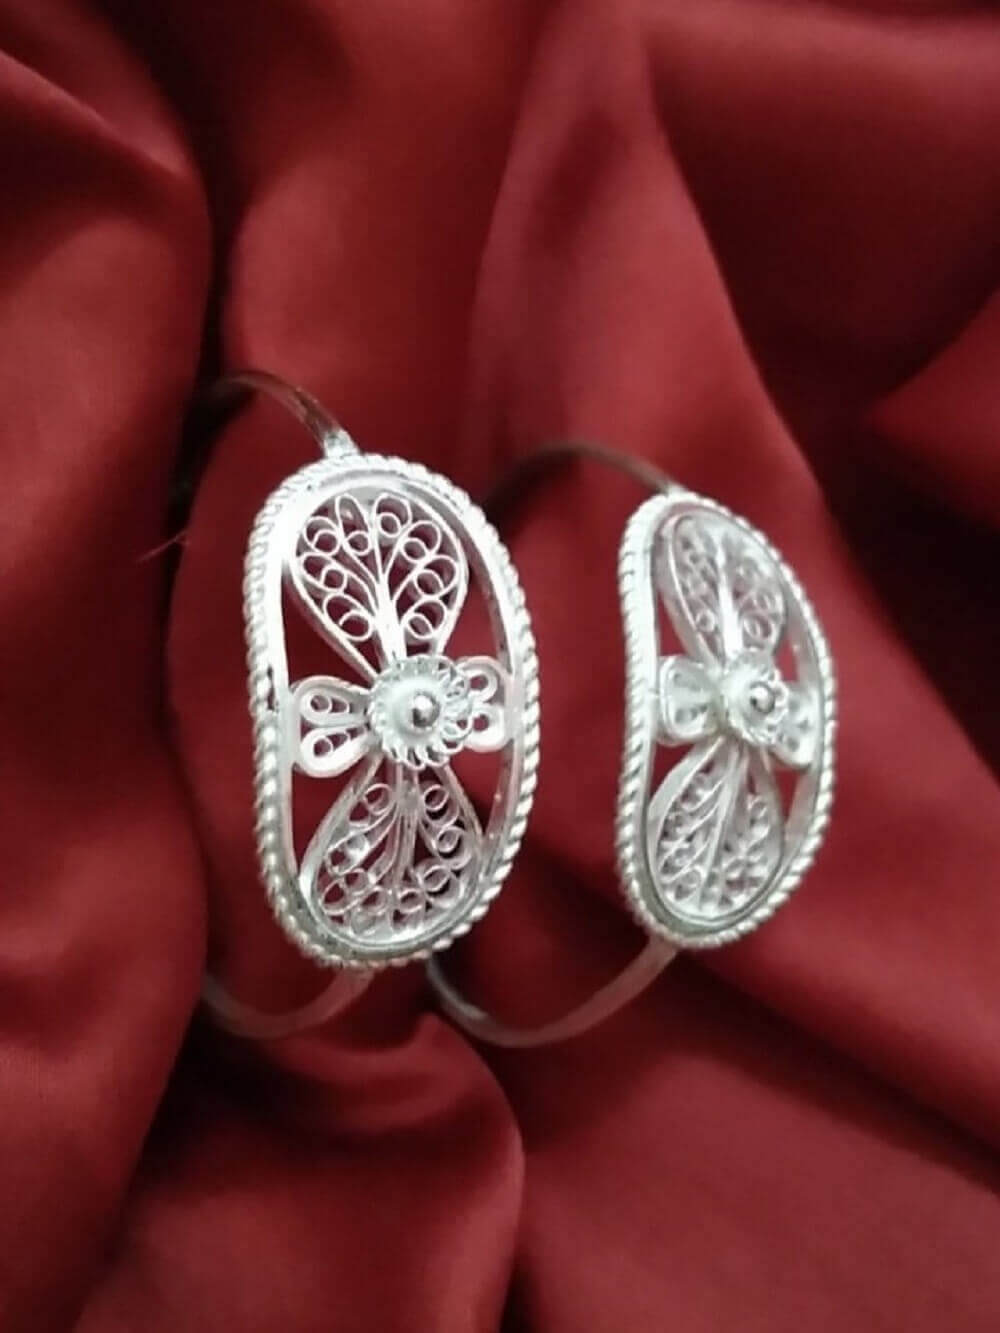 Silver bangle designs for baby